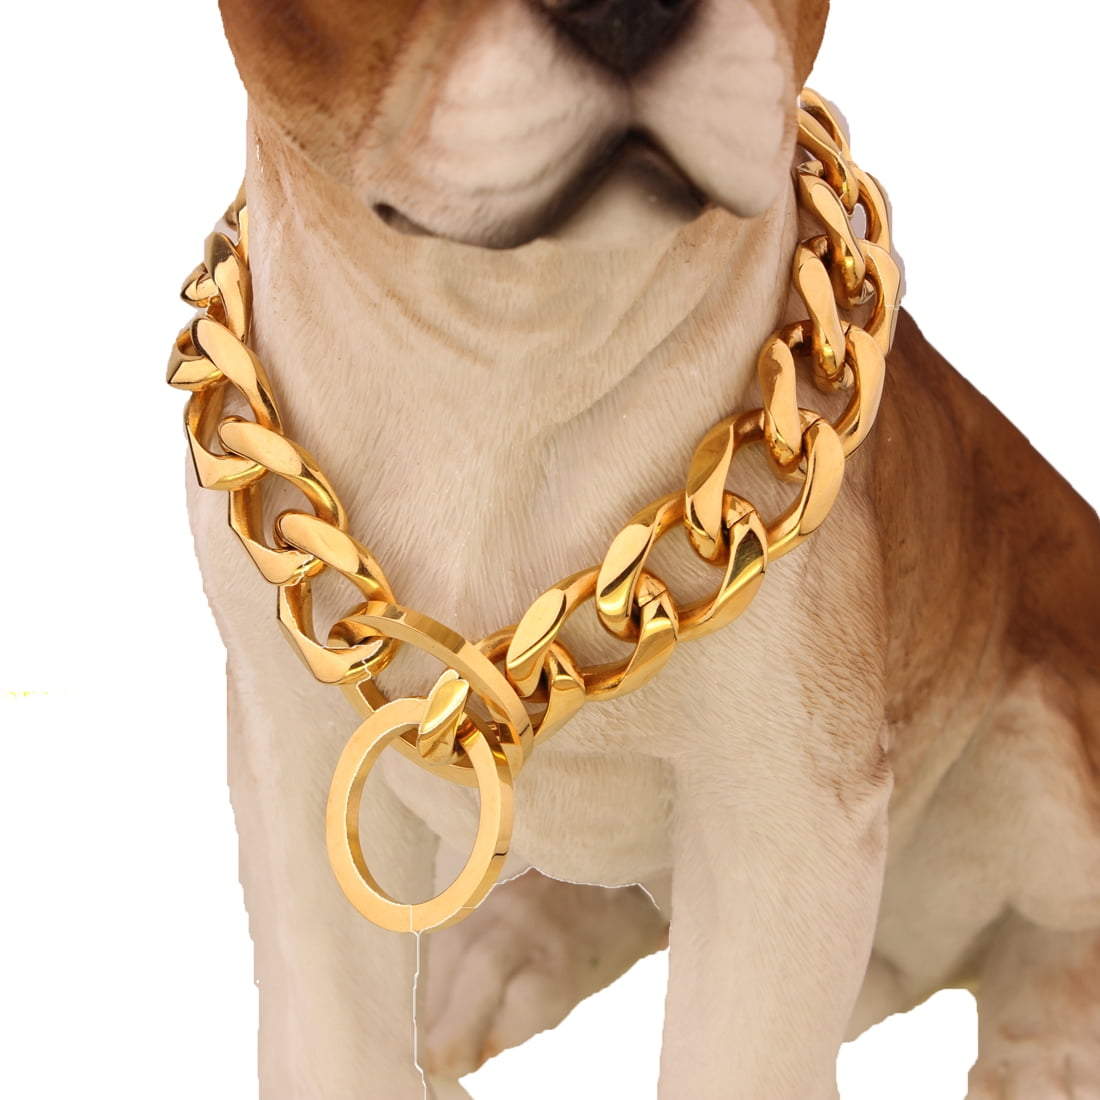 Stainless Steel Dog Chain, Strong Metal Necklace, Pet Training Choke Collar,  Gold Cuban Link for Large Walking Dog Ring, Luxury, - AliExpress